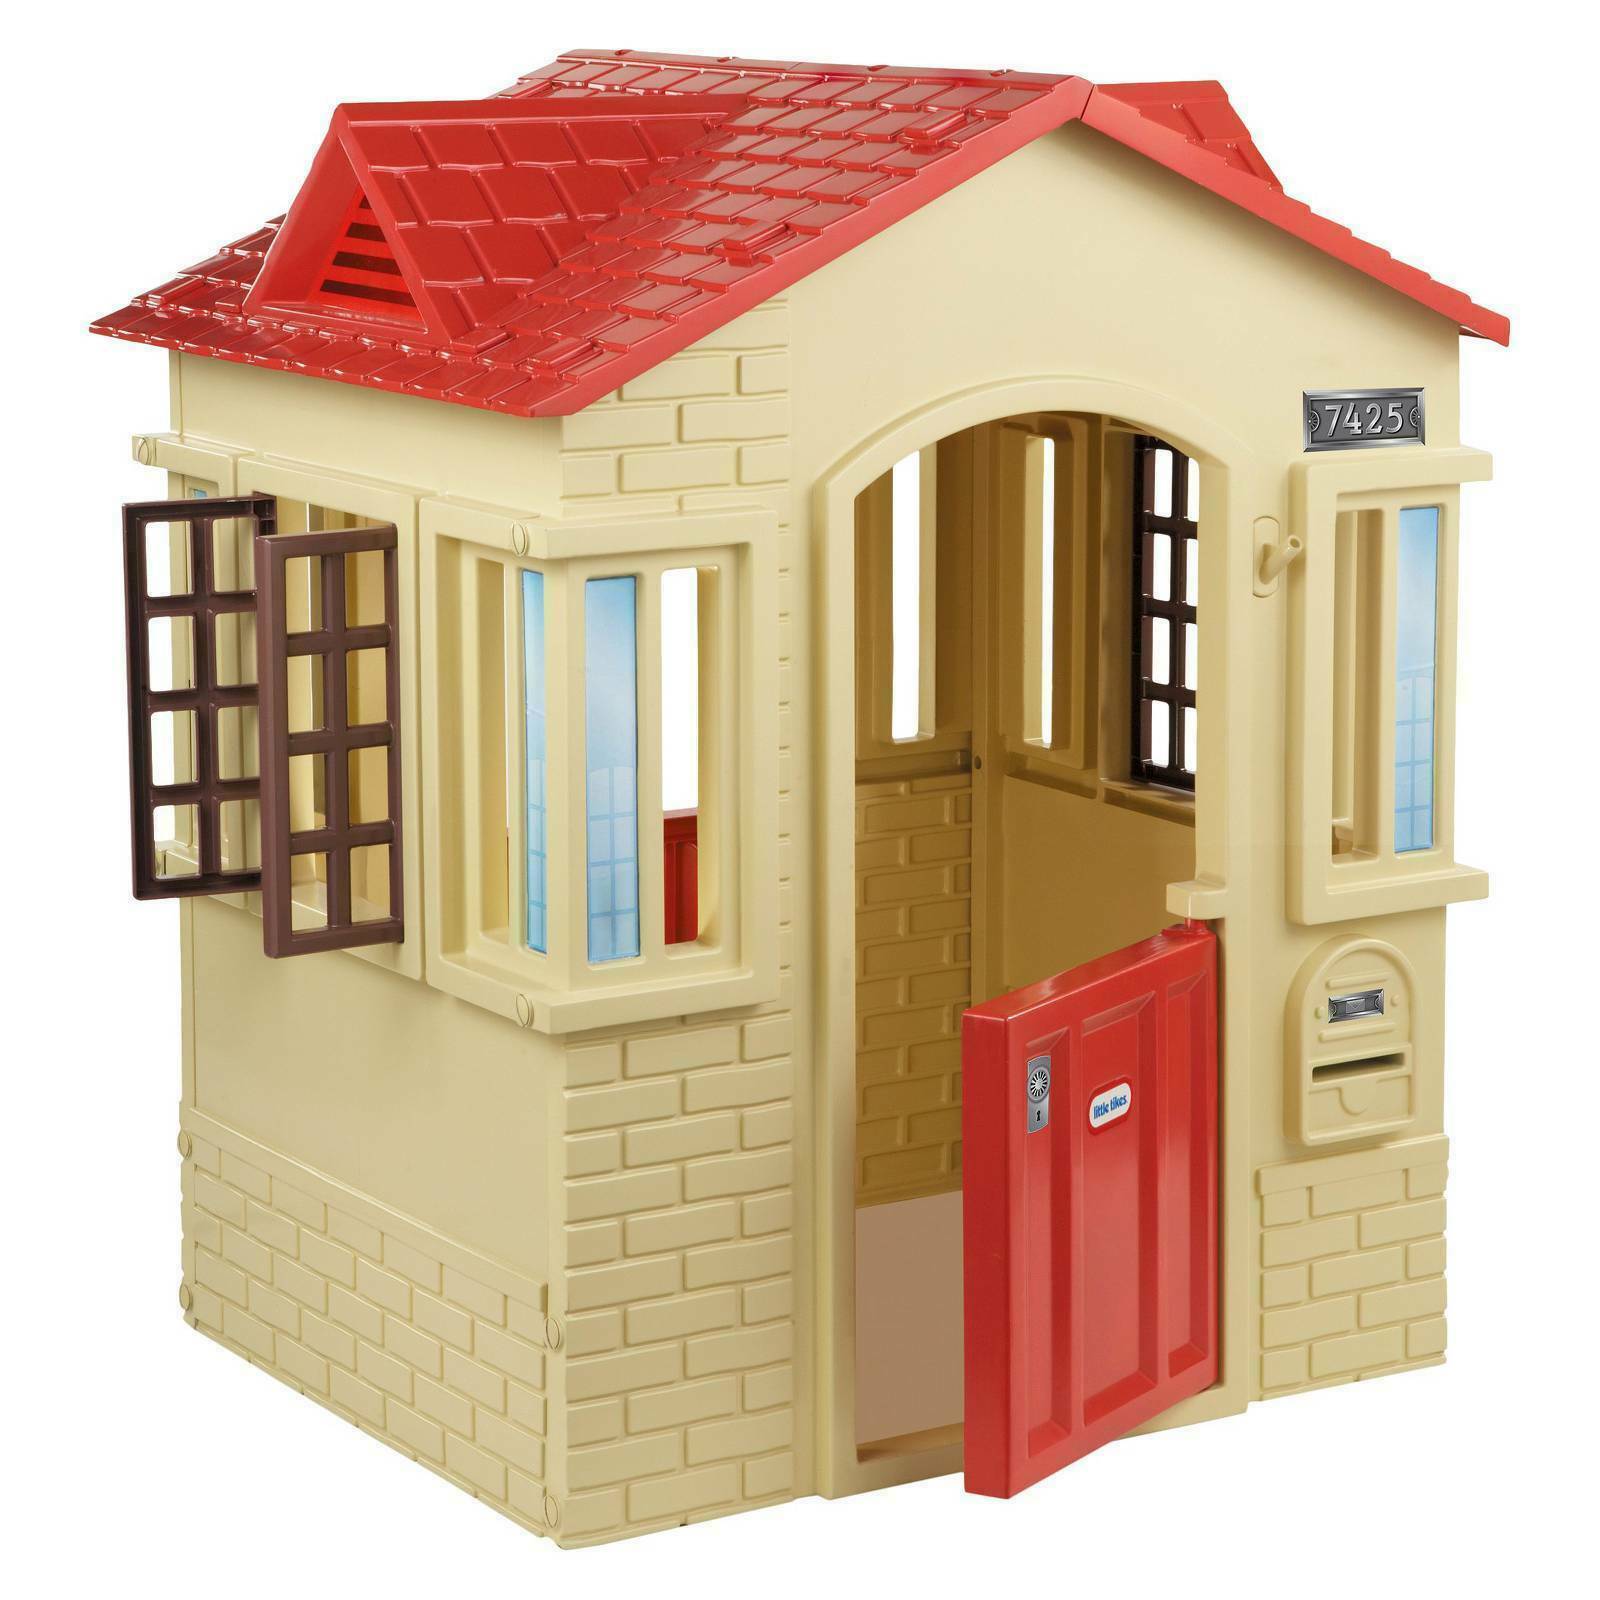 Tan Cape Cottage Playhouse Children Indoor Outdoor Portable Plastic Toy House - $149.99